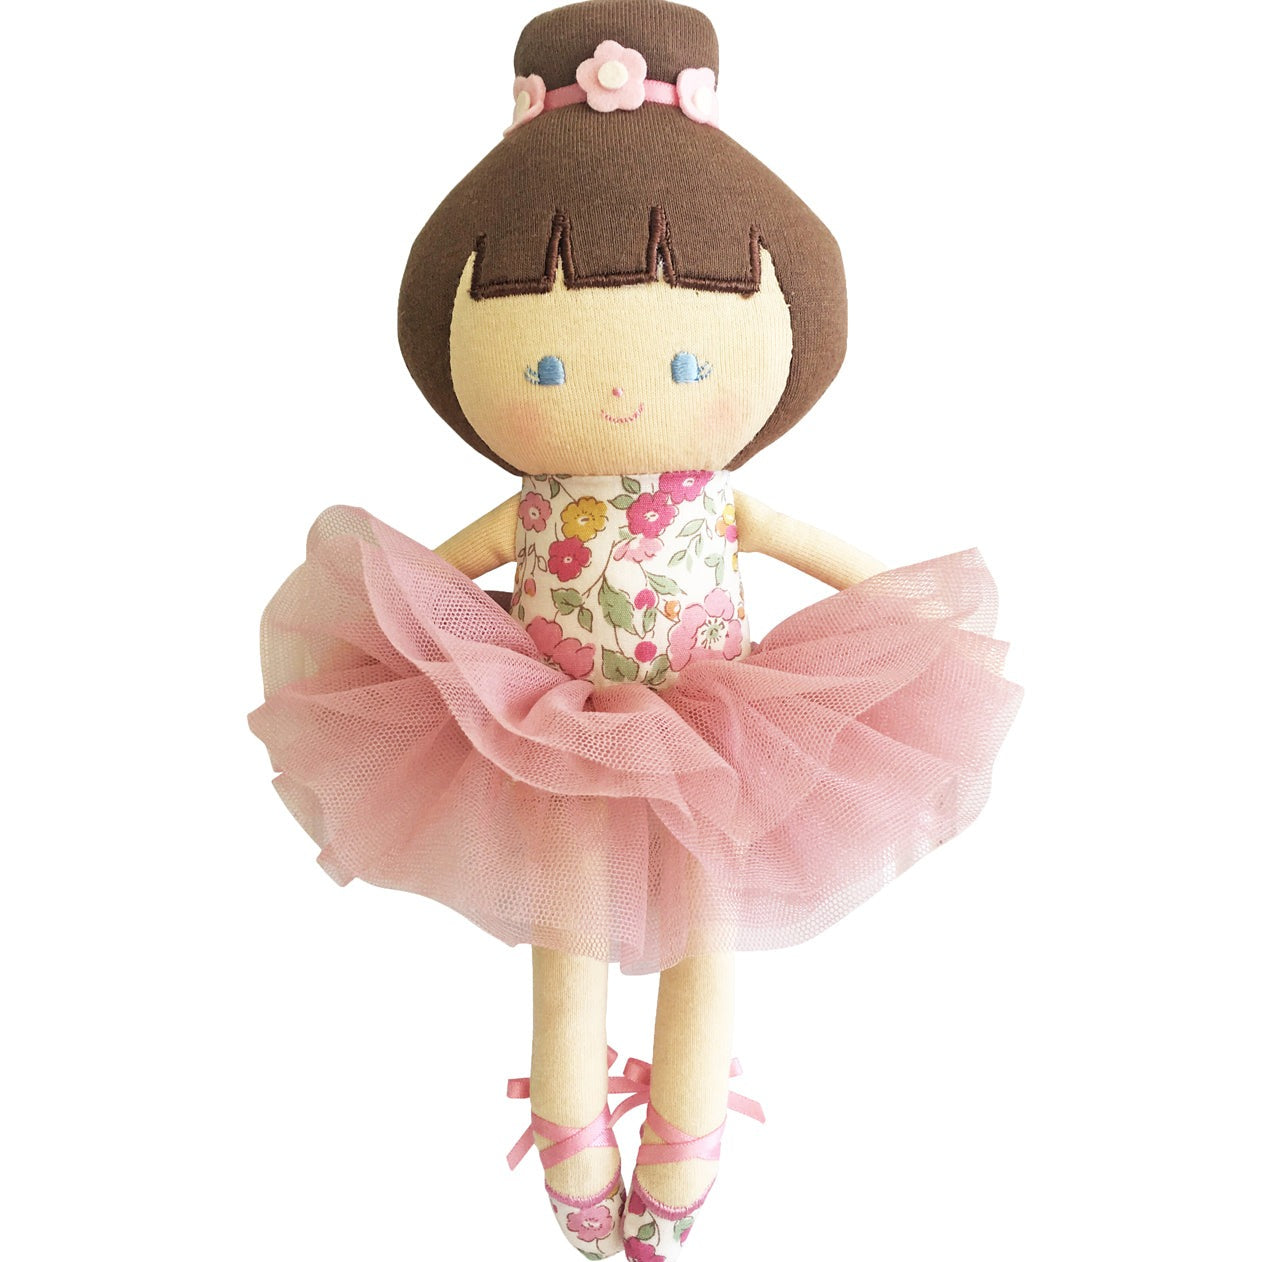 Alimrose ballerina doll - angus and dudley